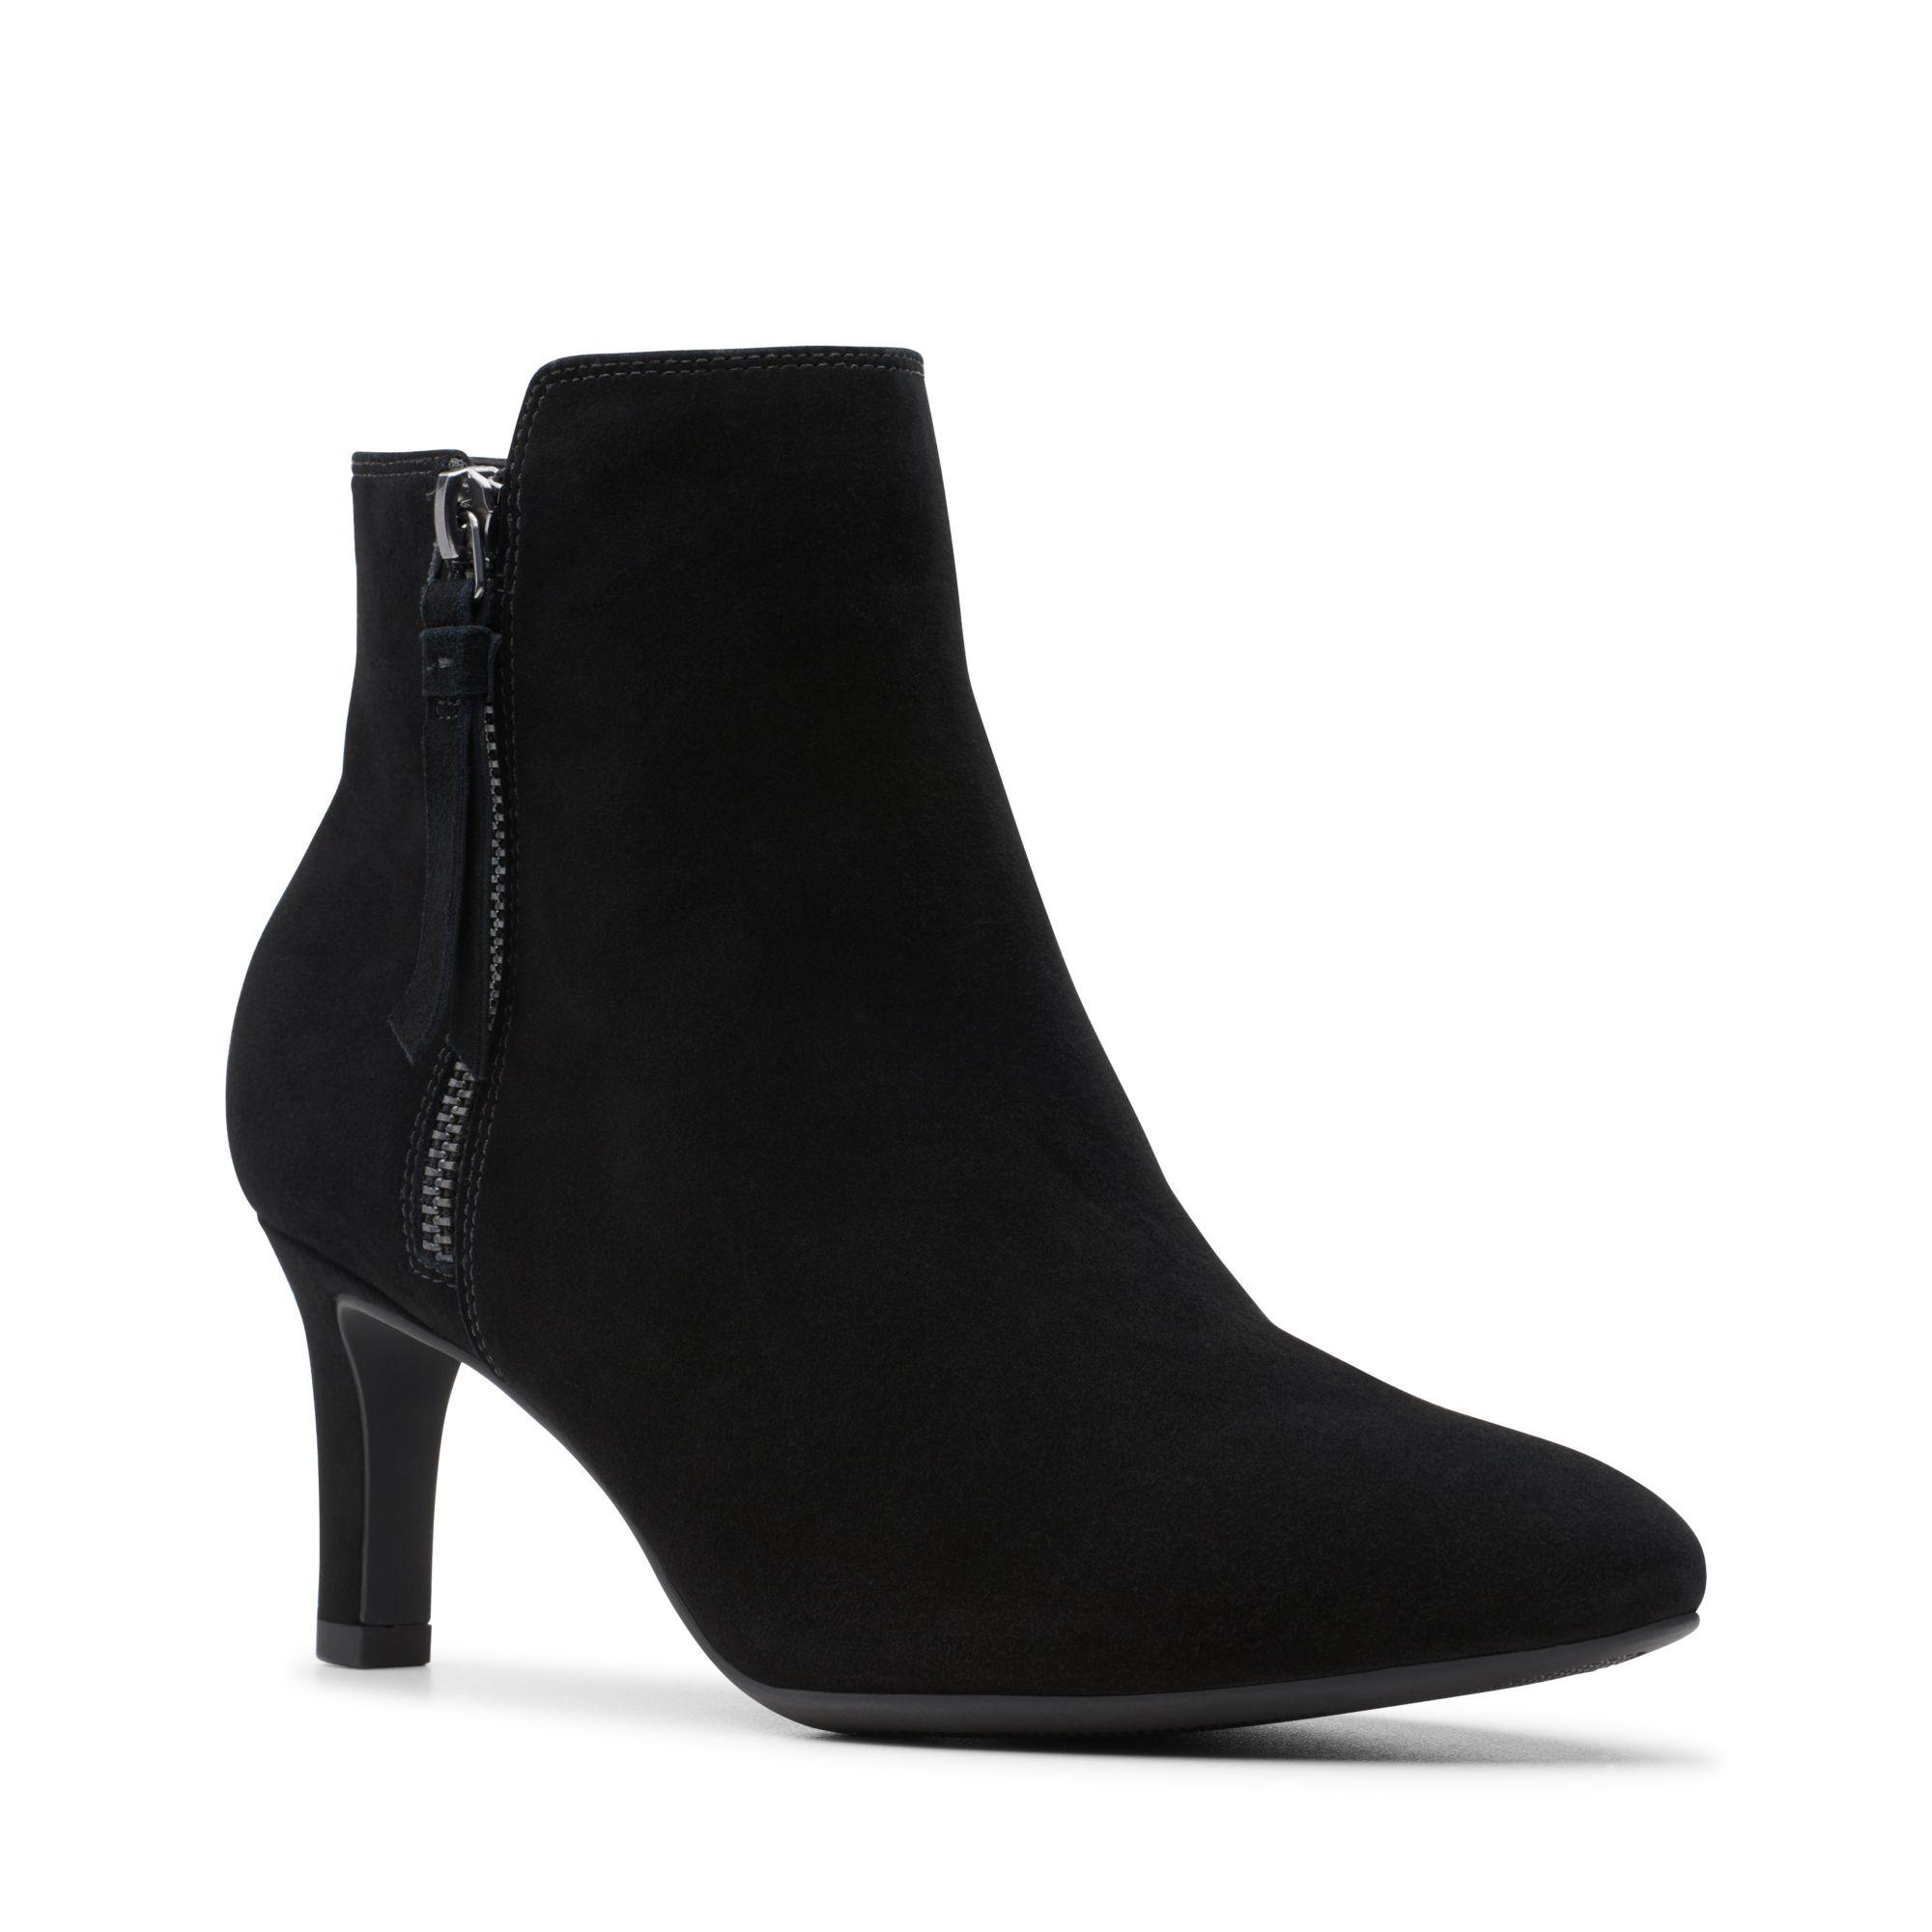 Clarks Suede 'calla Blossom' Mid Heel Ankle Boots in Black Suede (Black ...